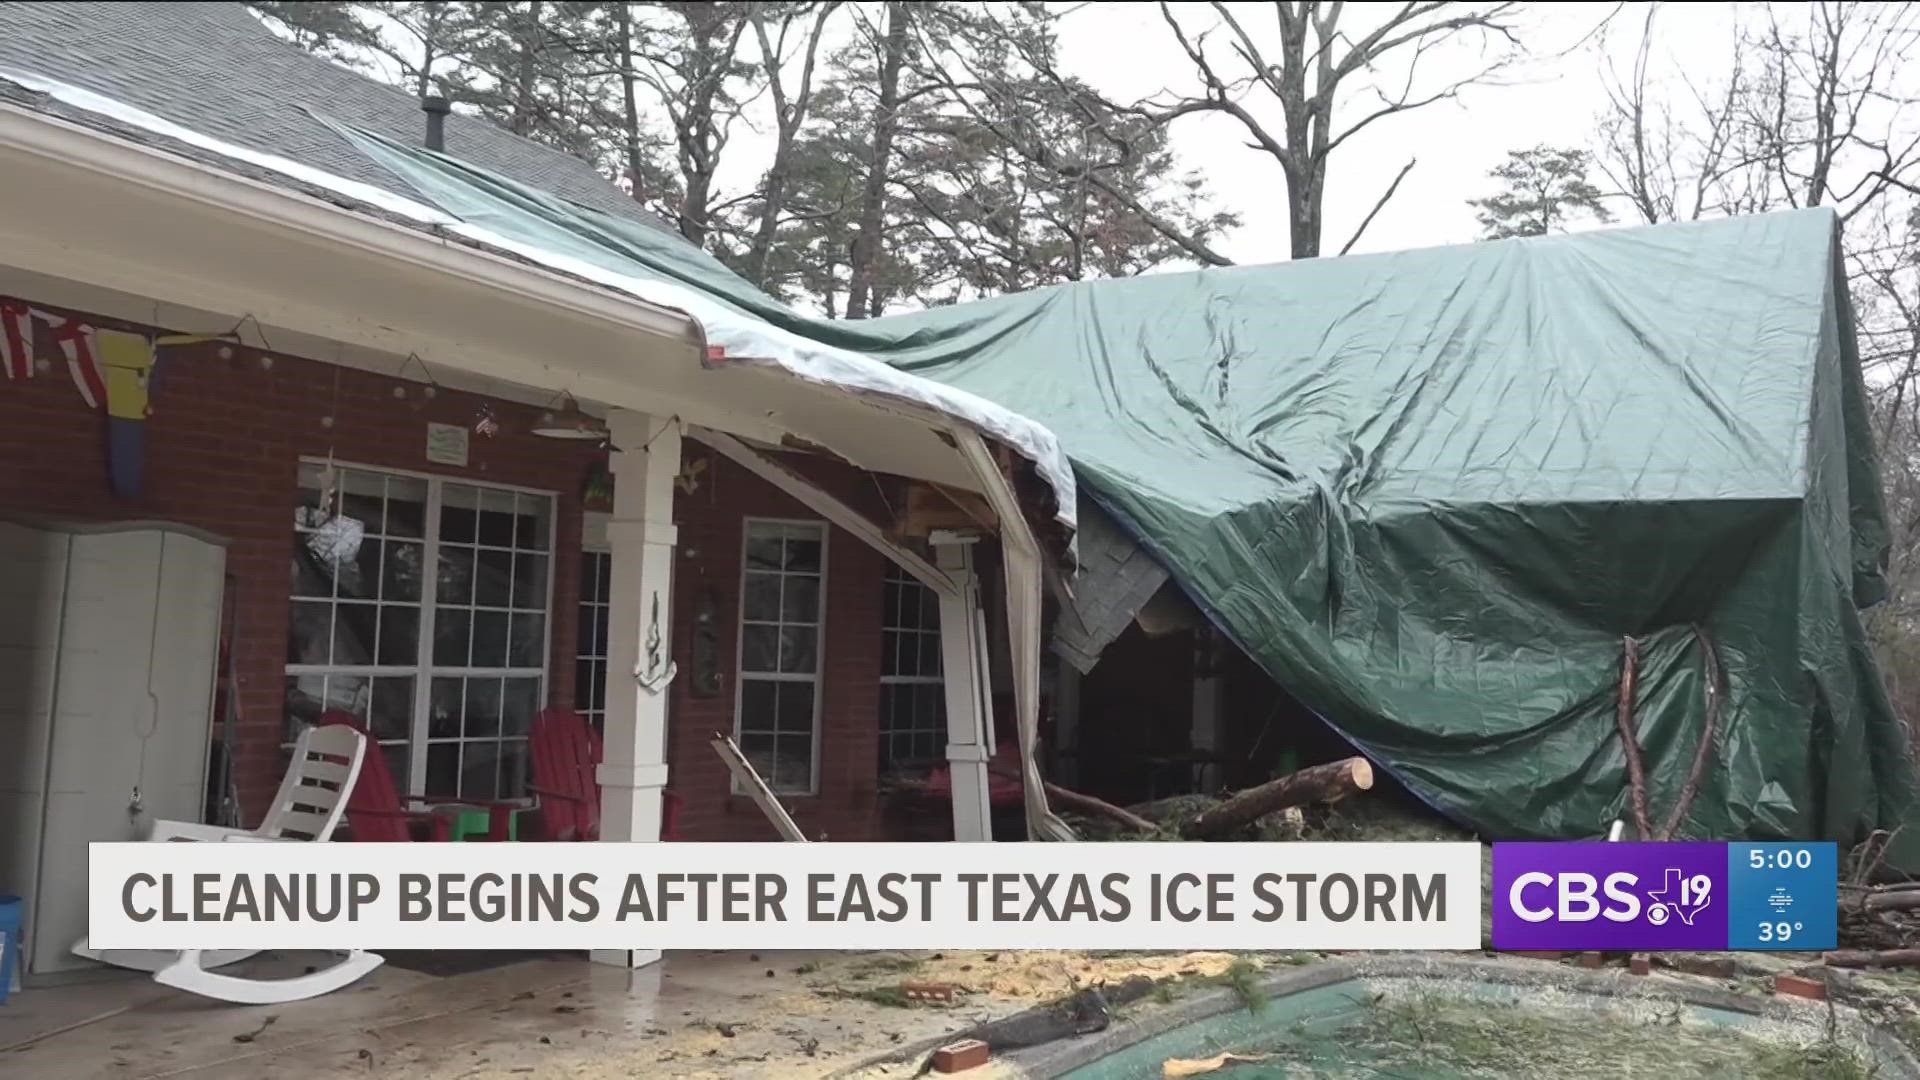 Cleanup begins after East Texas ice storm